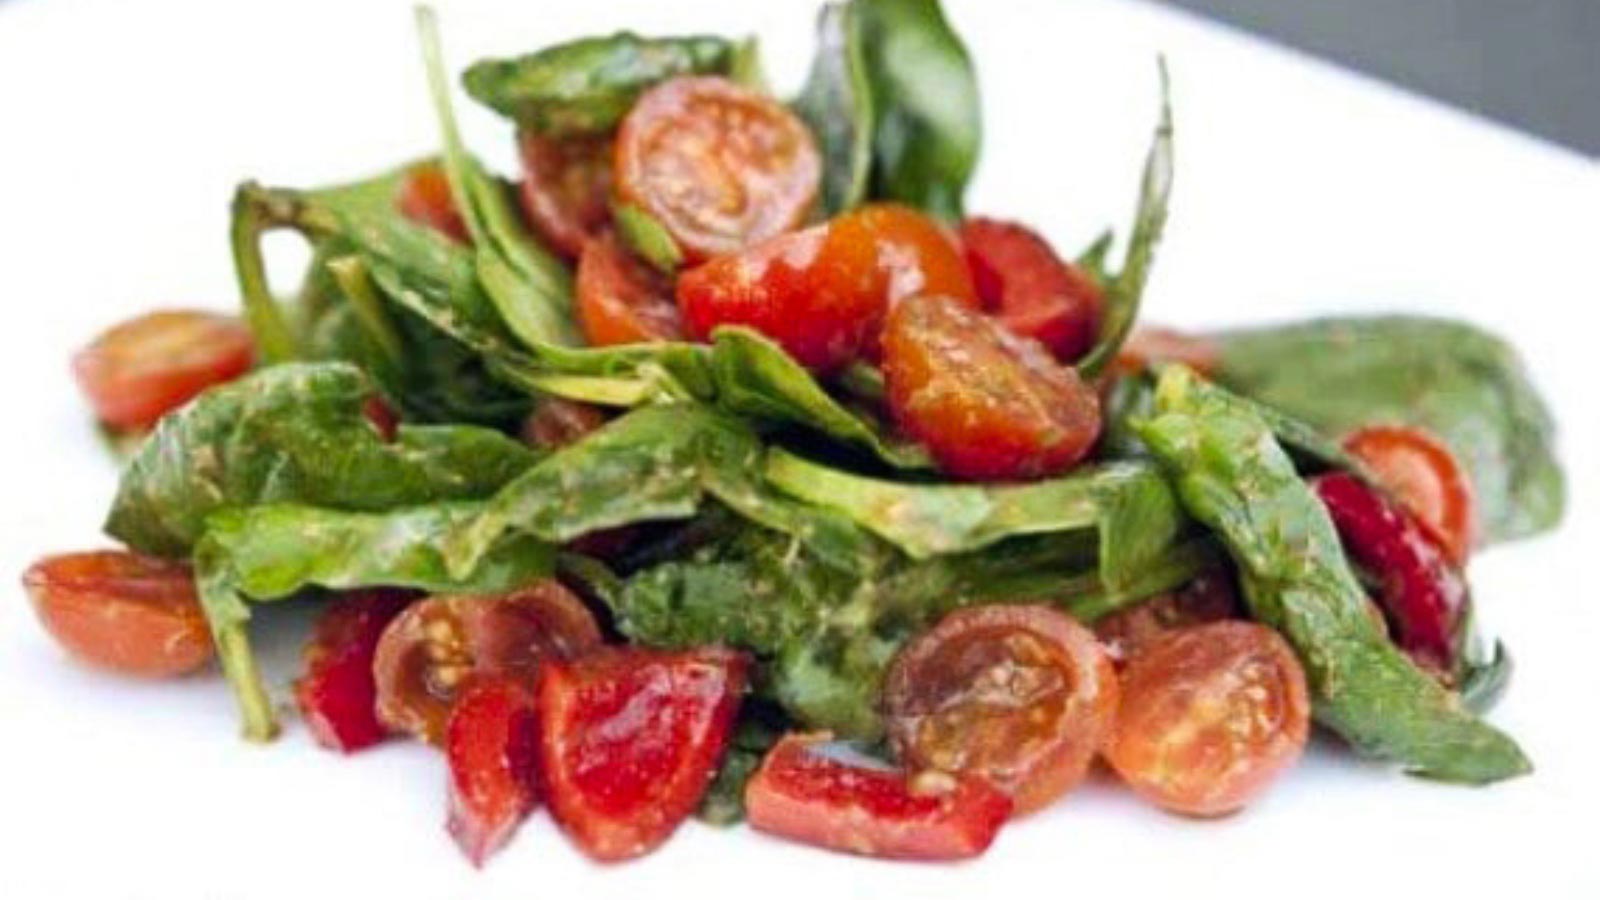 Spinach salad with pesto dressing and halved cherry tomatoes on a white plate.